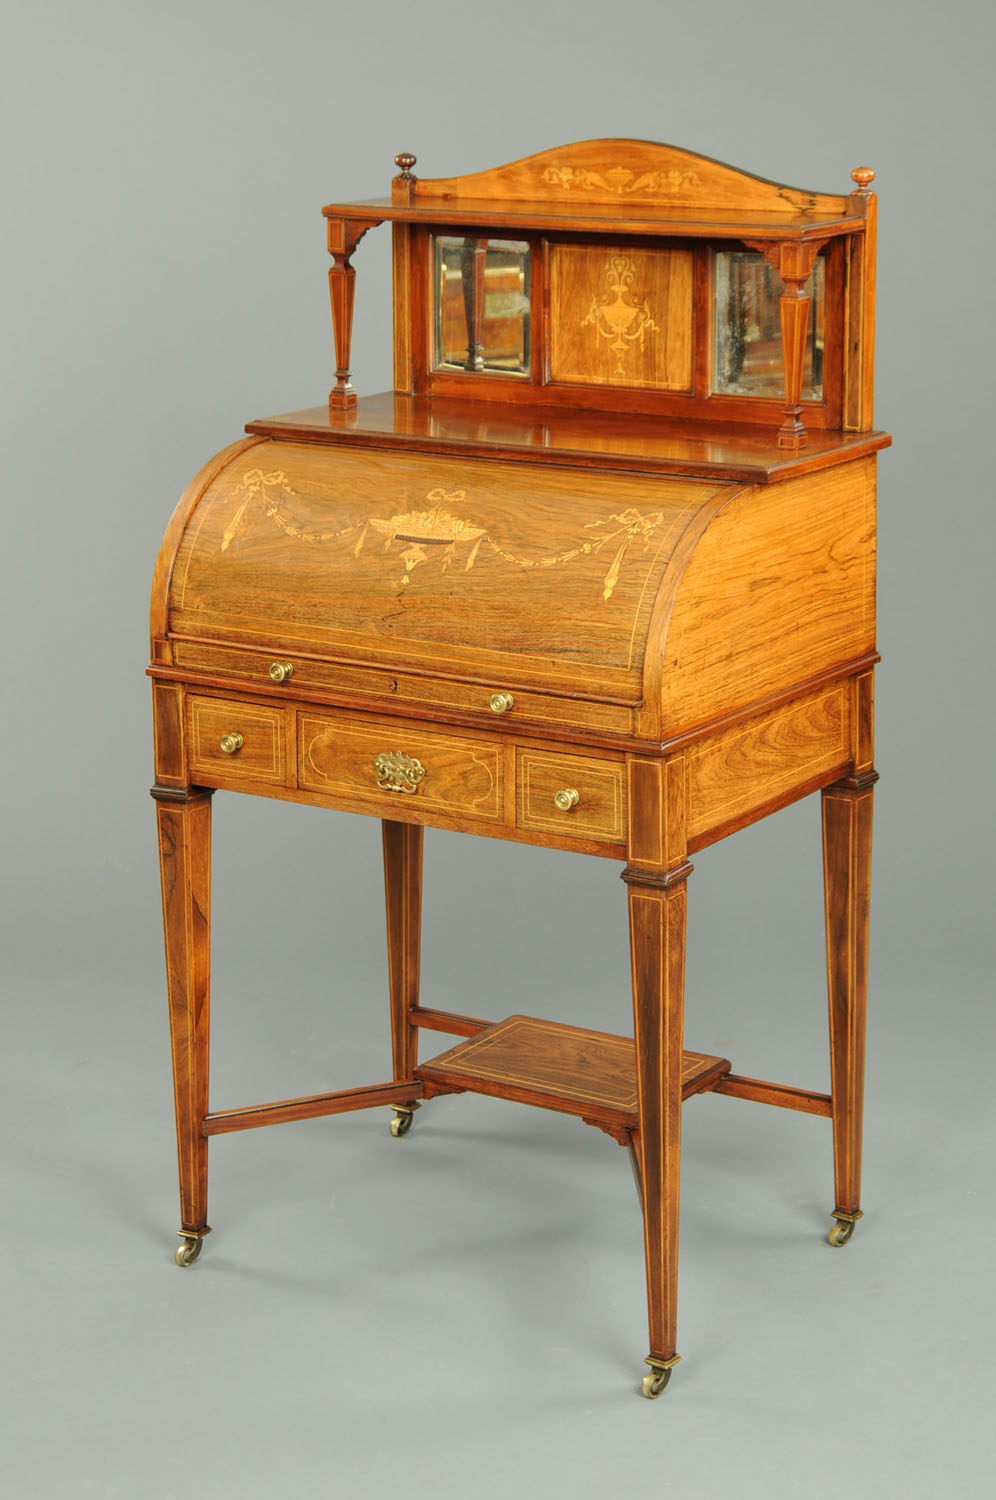 An Edwardian inlaid mahogany cylinder desk, with rear upstand above the cylinder bureau, with